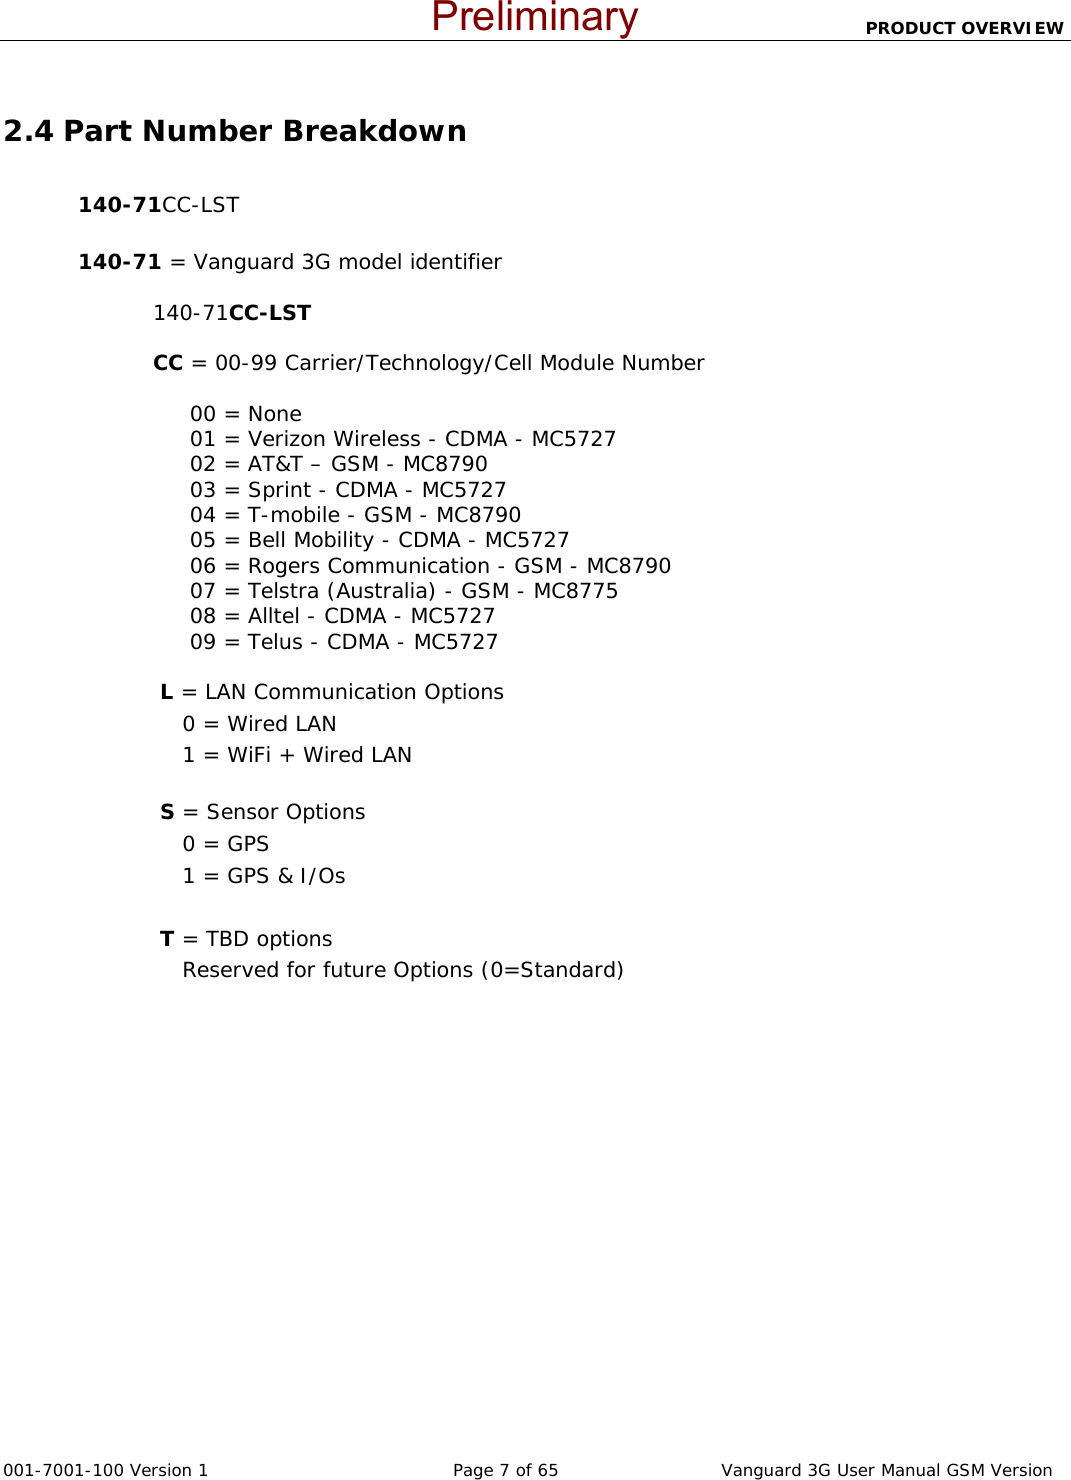                          PRODUCT OVERVIEW  001-7001-100 Version 1       Page 7 of 65       Vanguard 3G User Manual GSM Version  2.4 Part Number Breakdown  140-71CC-LST   140-71 = Vanguard 3G model identifier   140-71CC-LST                   CC = 00-99 Carrier/Technology/Cell Module Number                         00 = None      01 = Verizon Wireless - CDMA - MC5727      02 = AT&amp;T – GSM - MC8790      03 = Sprint - CDMA - MC5727      04 = T-mobile - GSM - MC8790      05 = Bell Mobility - CDMA - MC5727      06 = Rogers Communication - GSM - MC8790      07 = Telstra (Australia) - GSM - MC8775      08 = Alltel - CDMA - MC5727      09 = Telus - CDMA - MC5727   L = LAN Communication Options     0 = Wired LAN      1 = WiFi + Wired LAN   S = Sensor Options     0 = GPS     1 = GPS &amp; I/Os      T = TBD options     Reserved for future Options (0=Standard) Preliminary